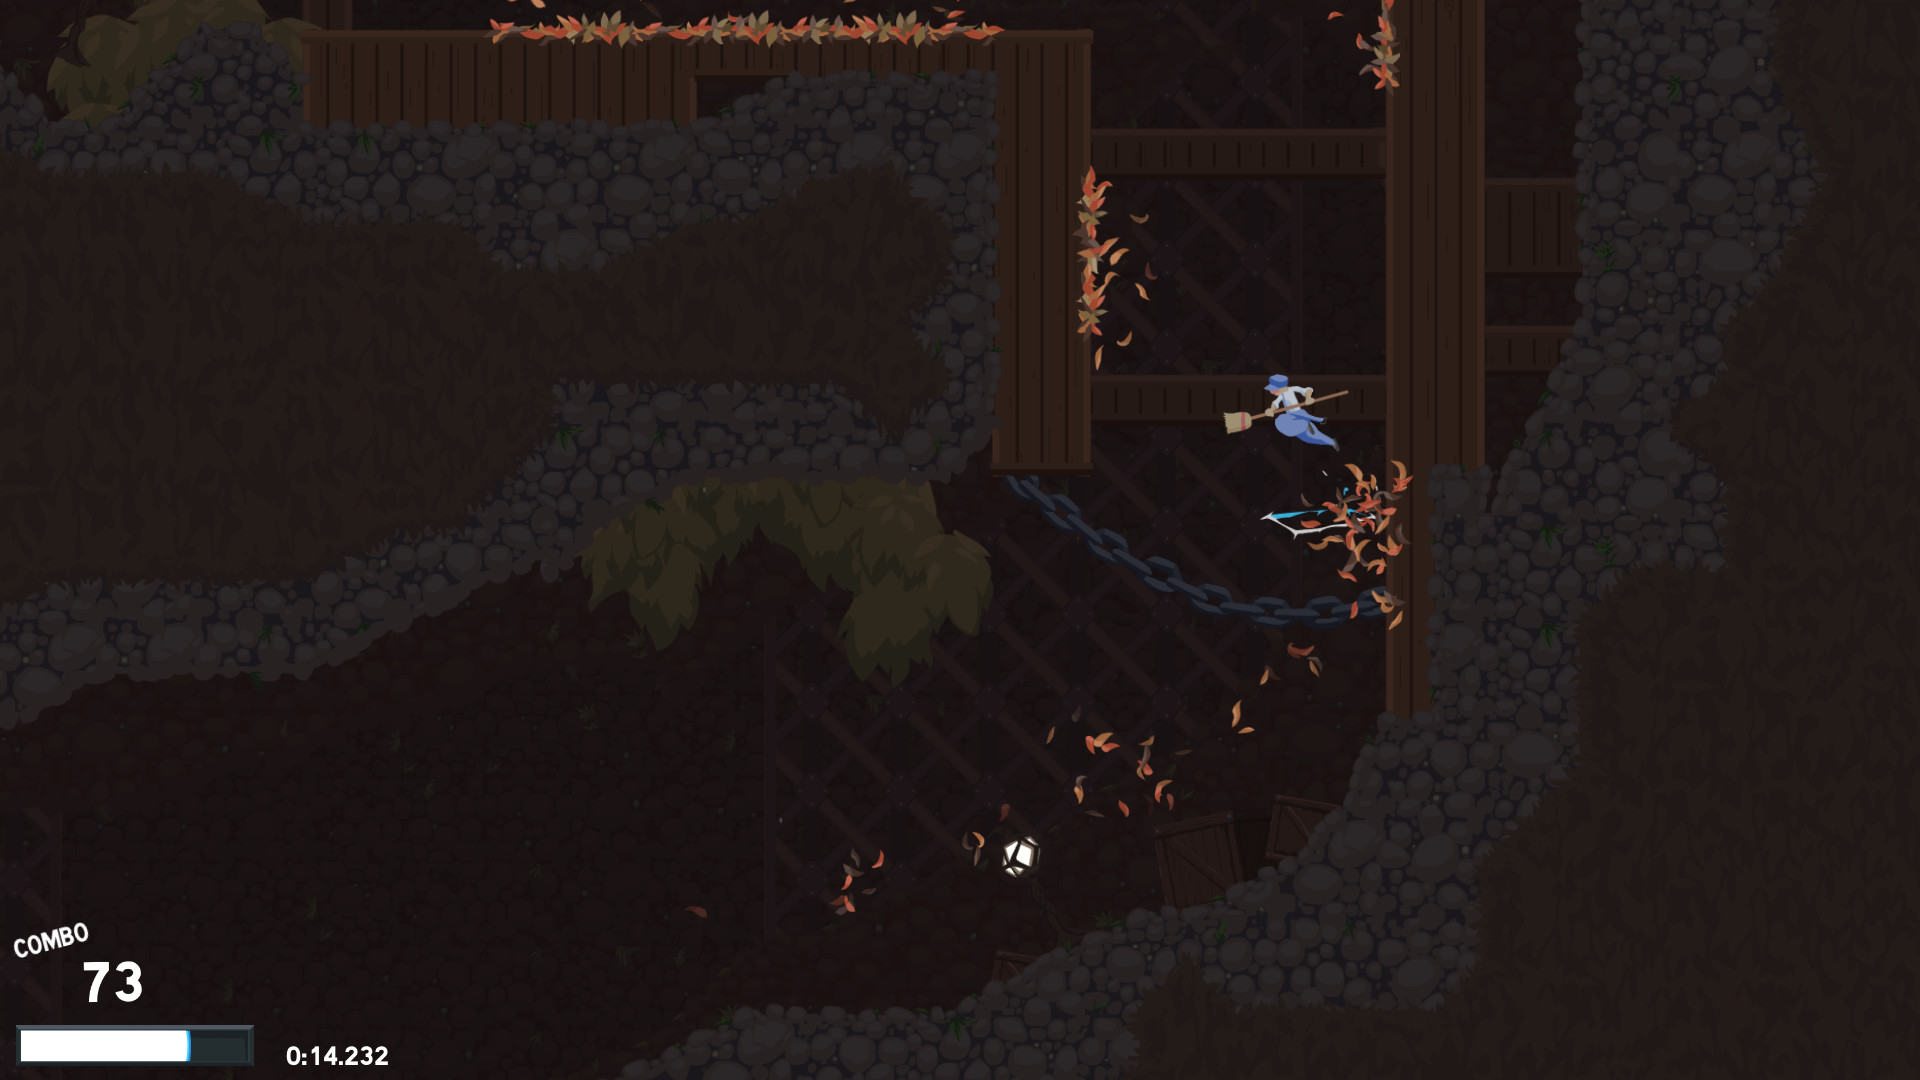 dustforce dx android